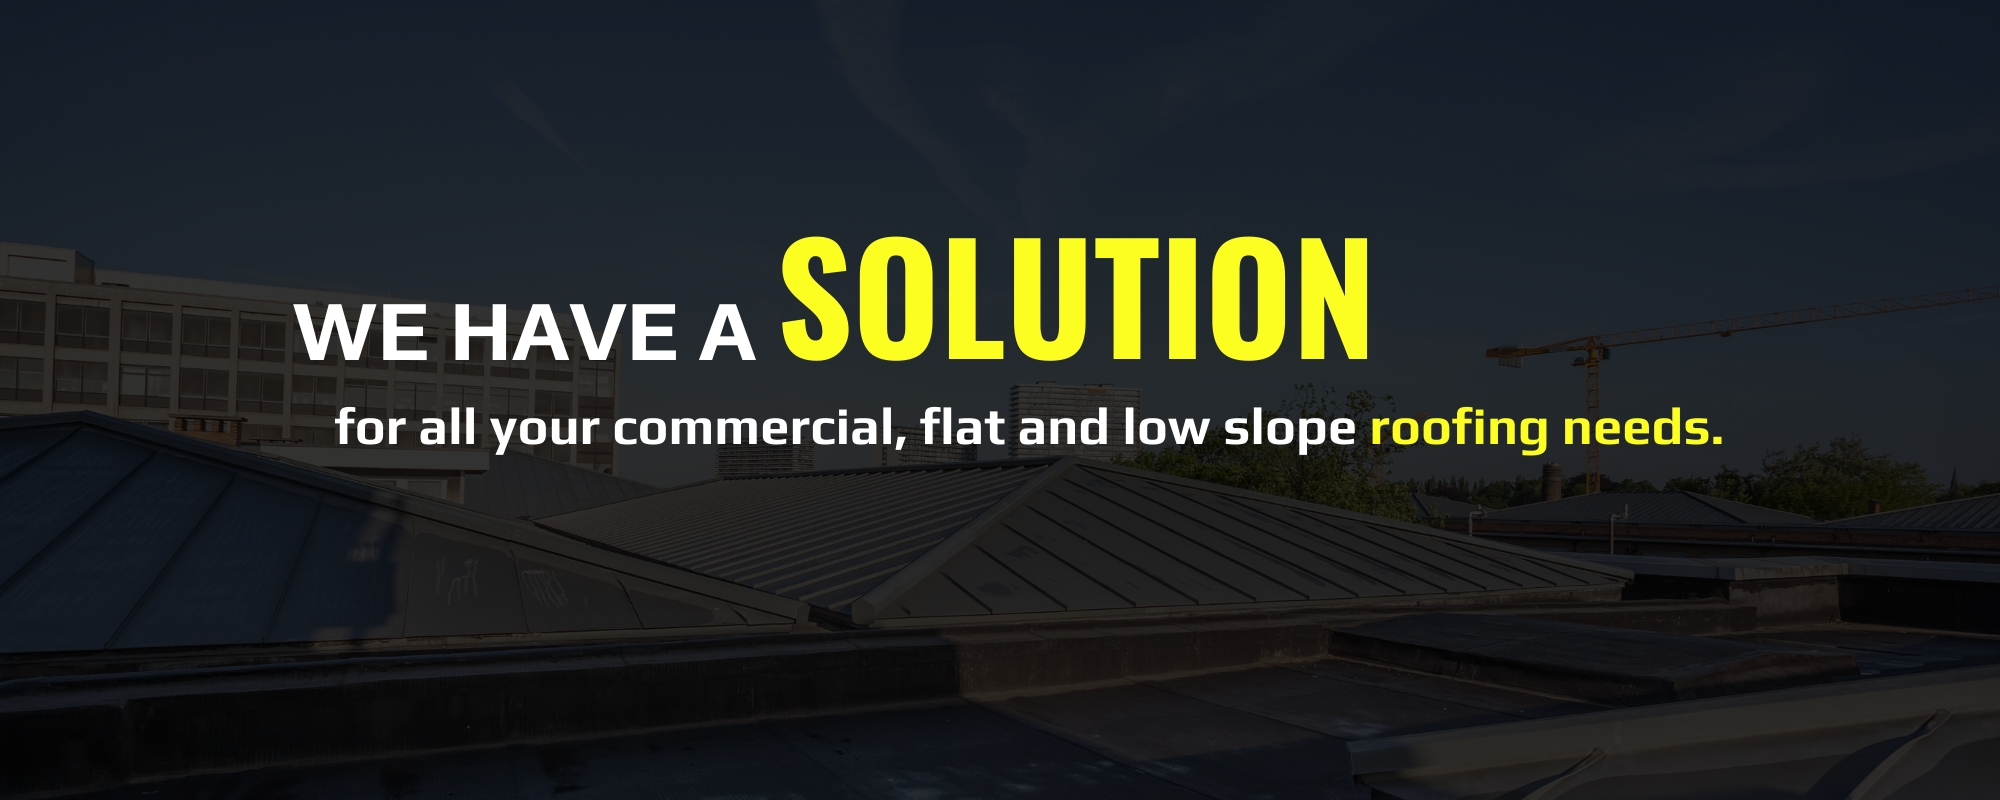 We have a solution for your roofing needs